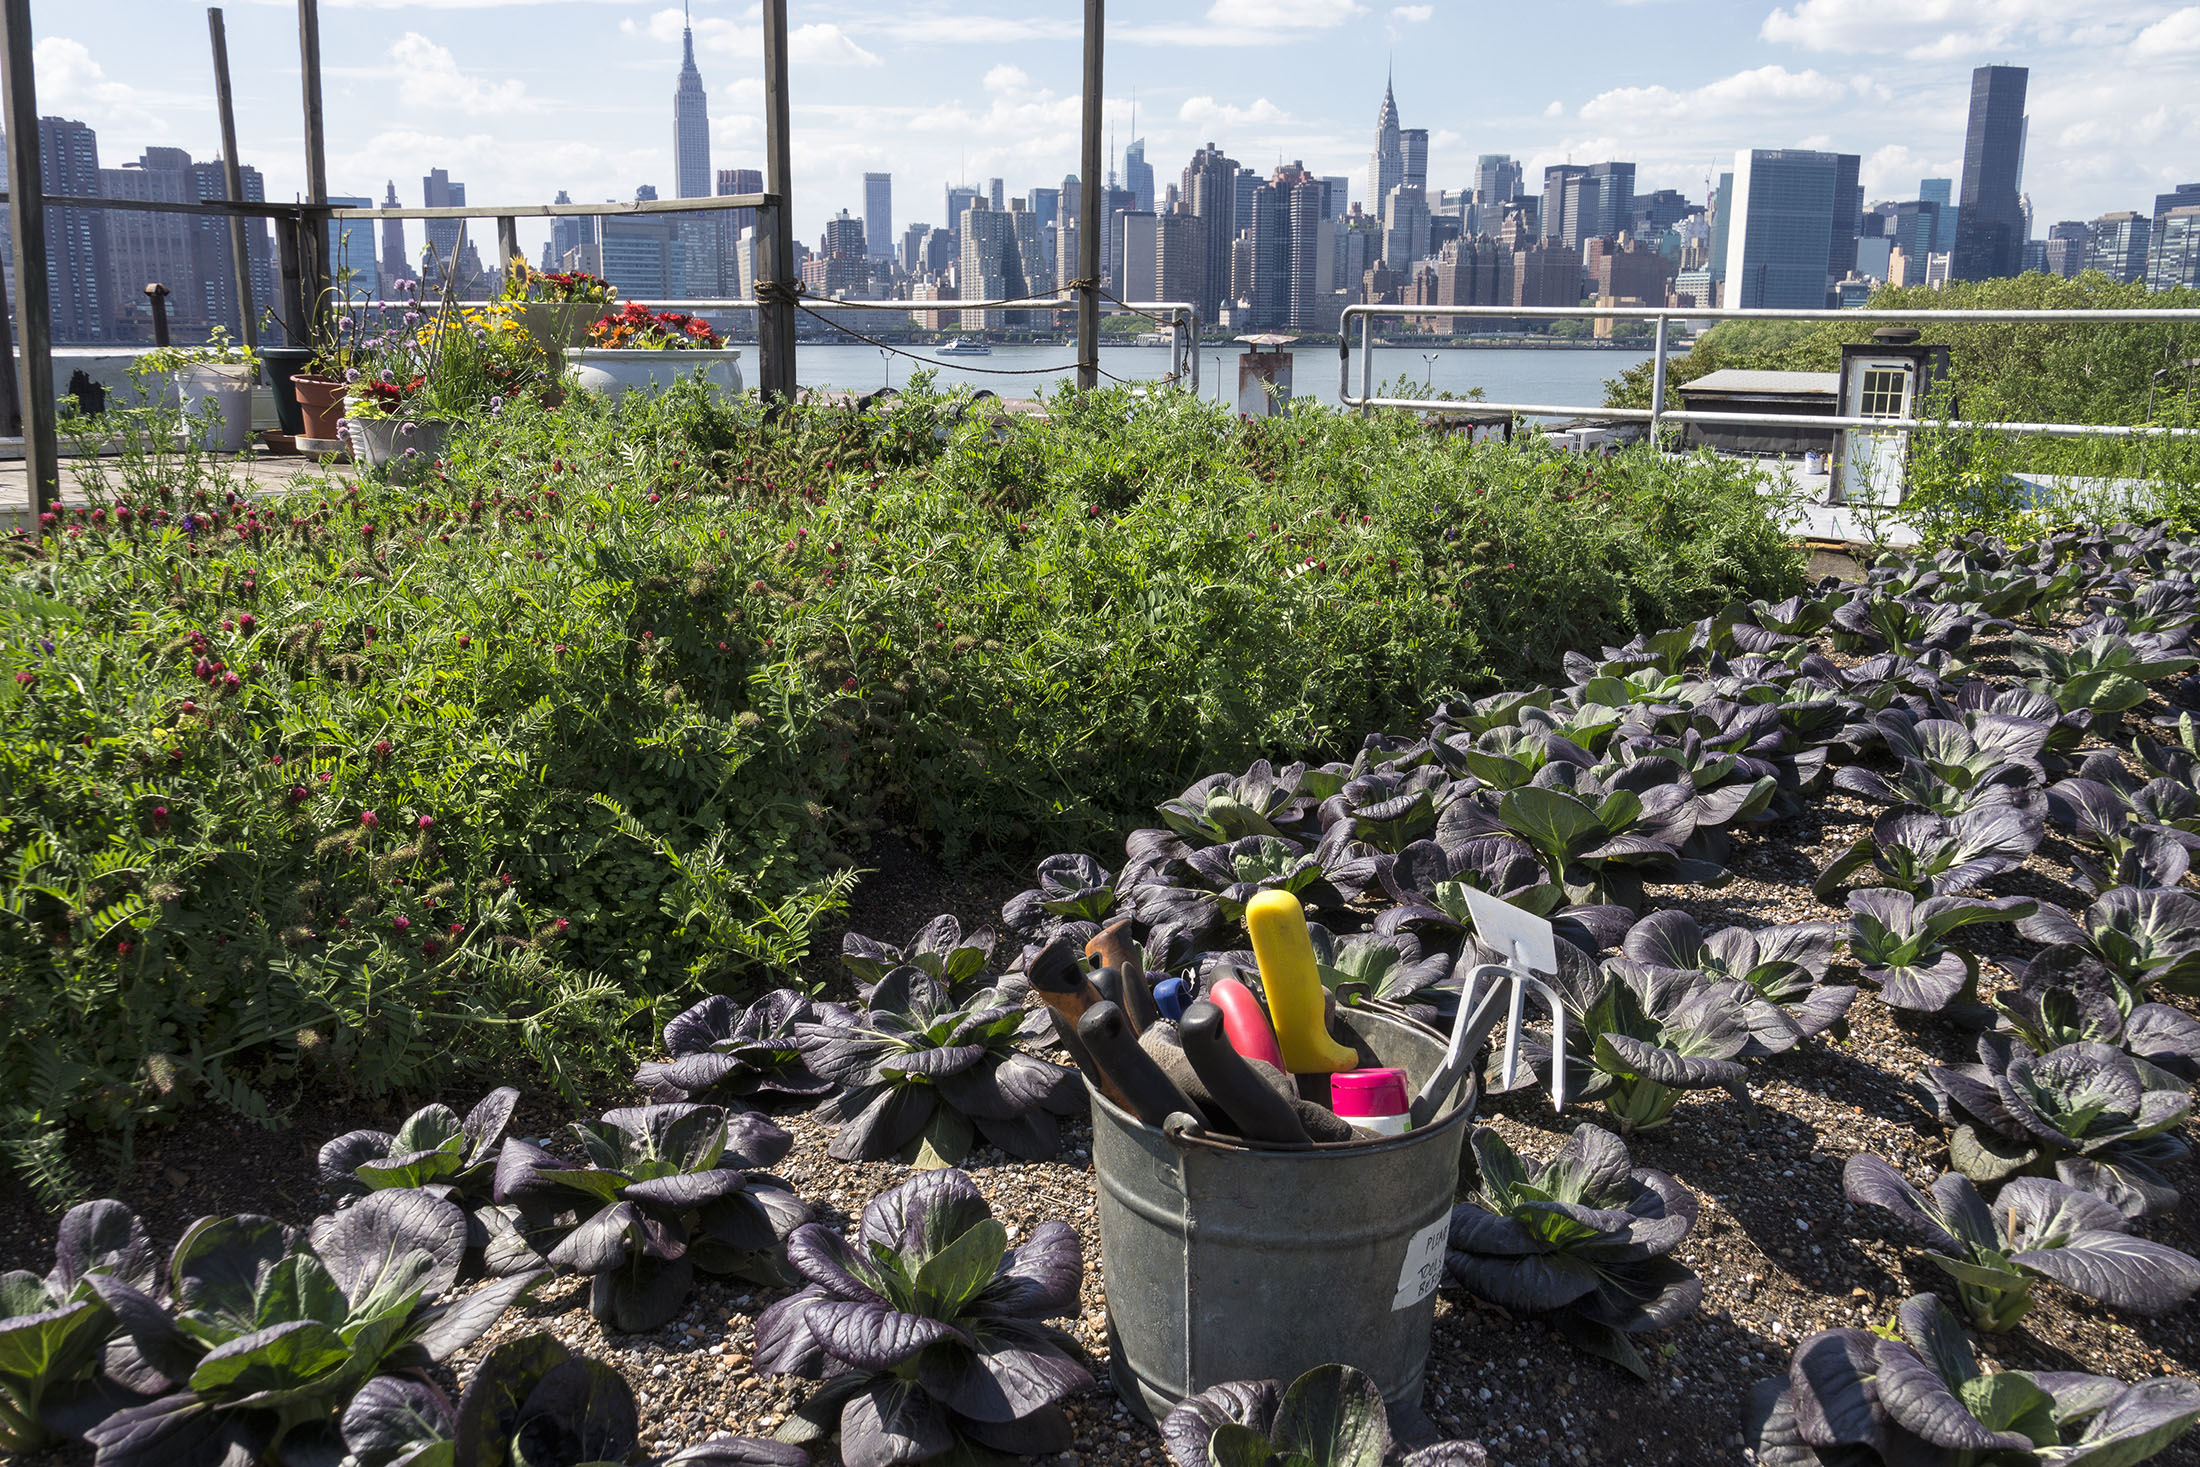 Rooftop gardens can help alleviate heat in cities, study finds